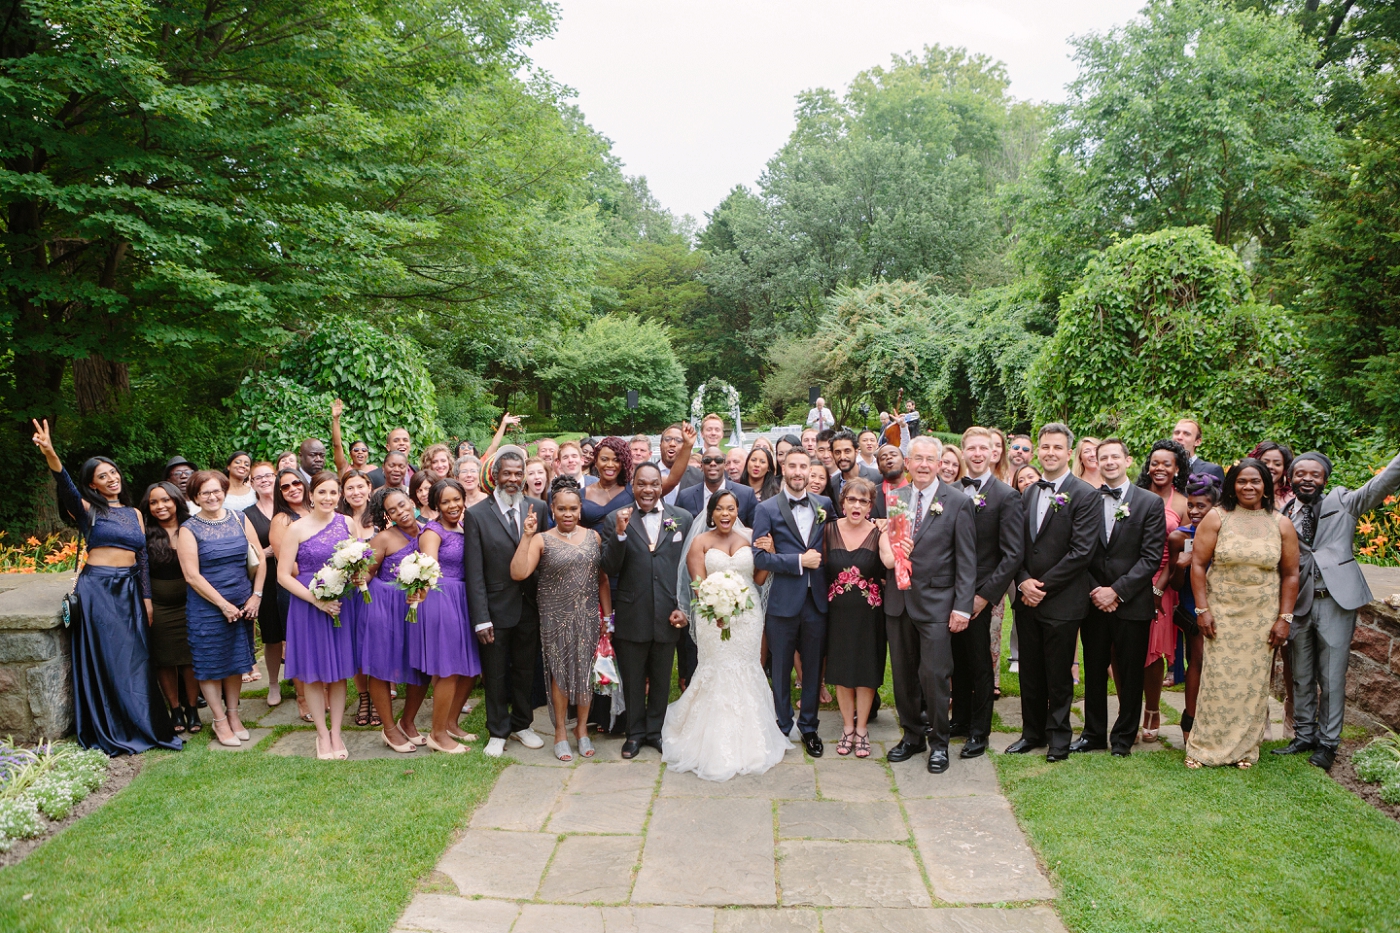 multi racial and cross cultural wedding group photo